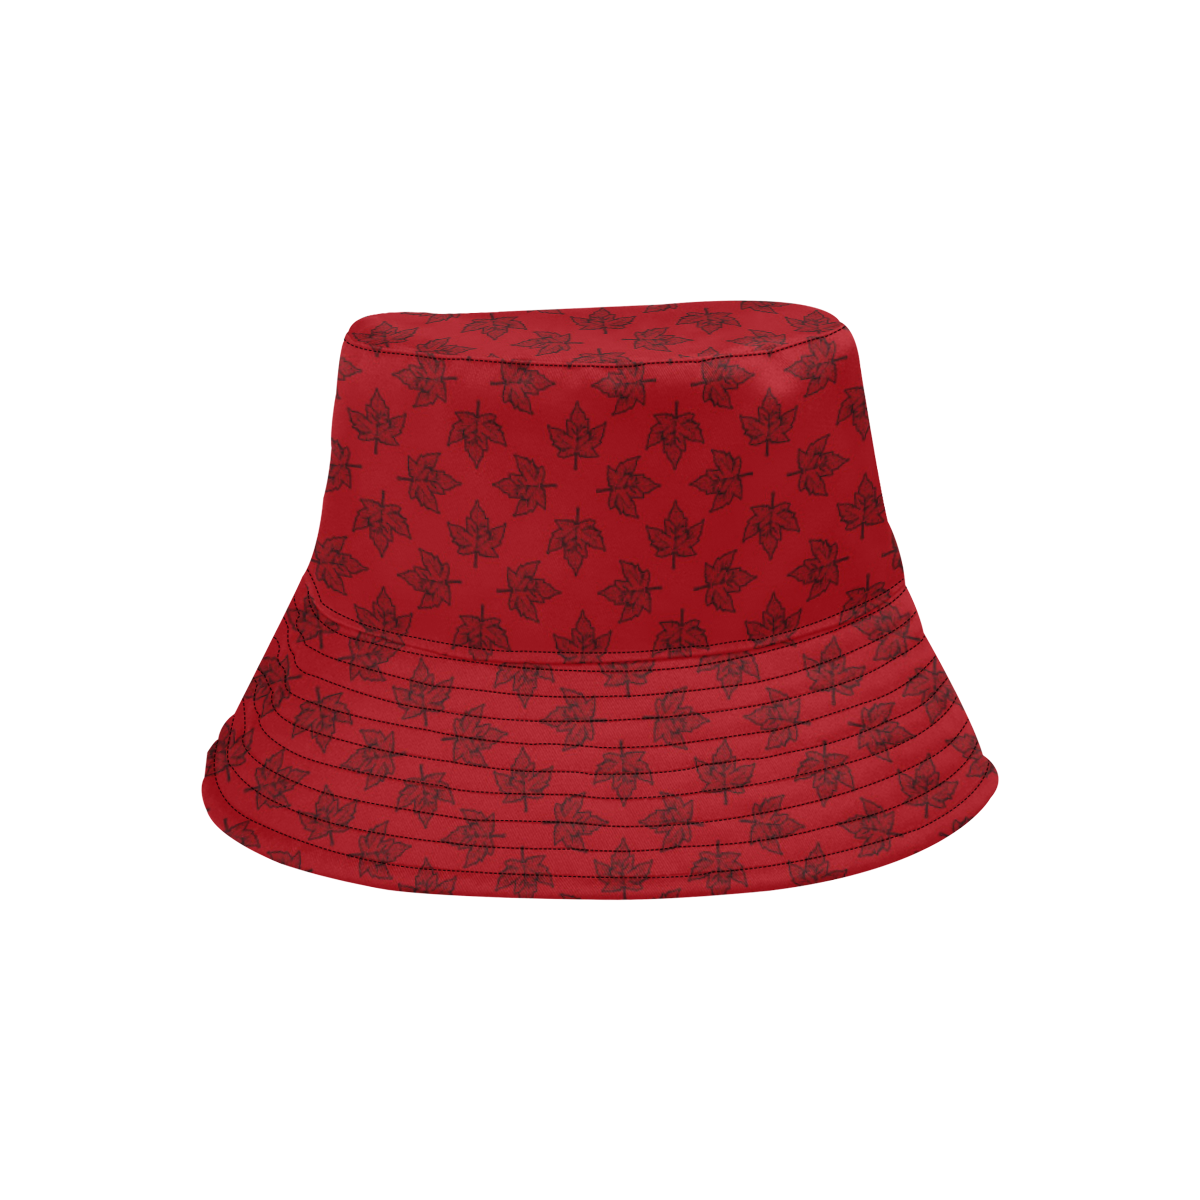 Cool Canada Bucket Hats Retro Red All Over Print Bucket Hat for Men